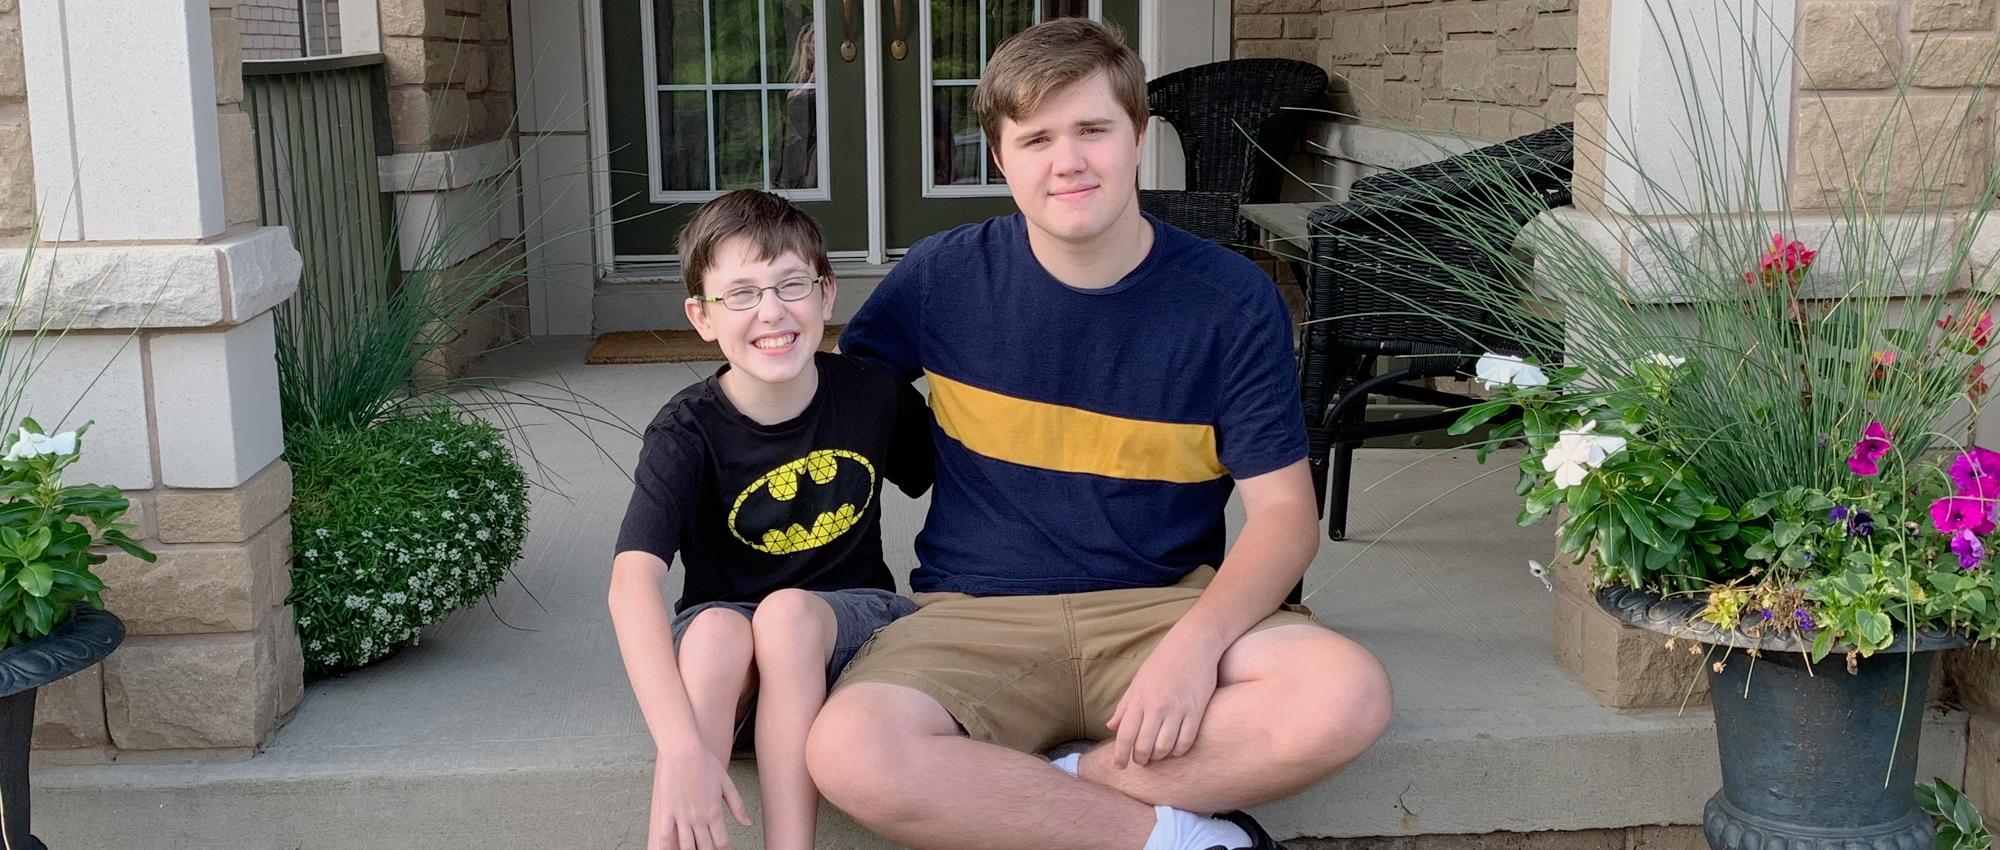 Nolan Clark, a teen who donated blood for the first time, sits on a porch with his younger brother Nicholas who had blood transfusions as an infant.